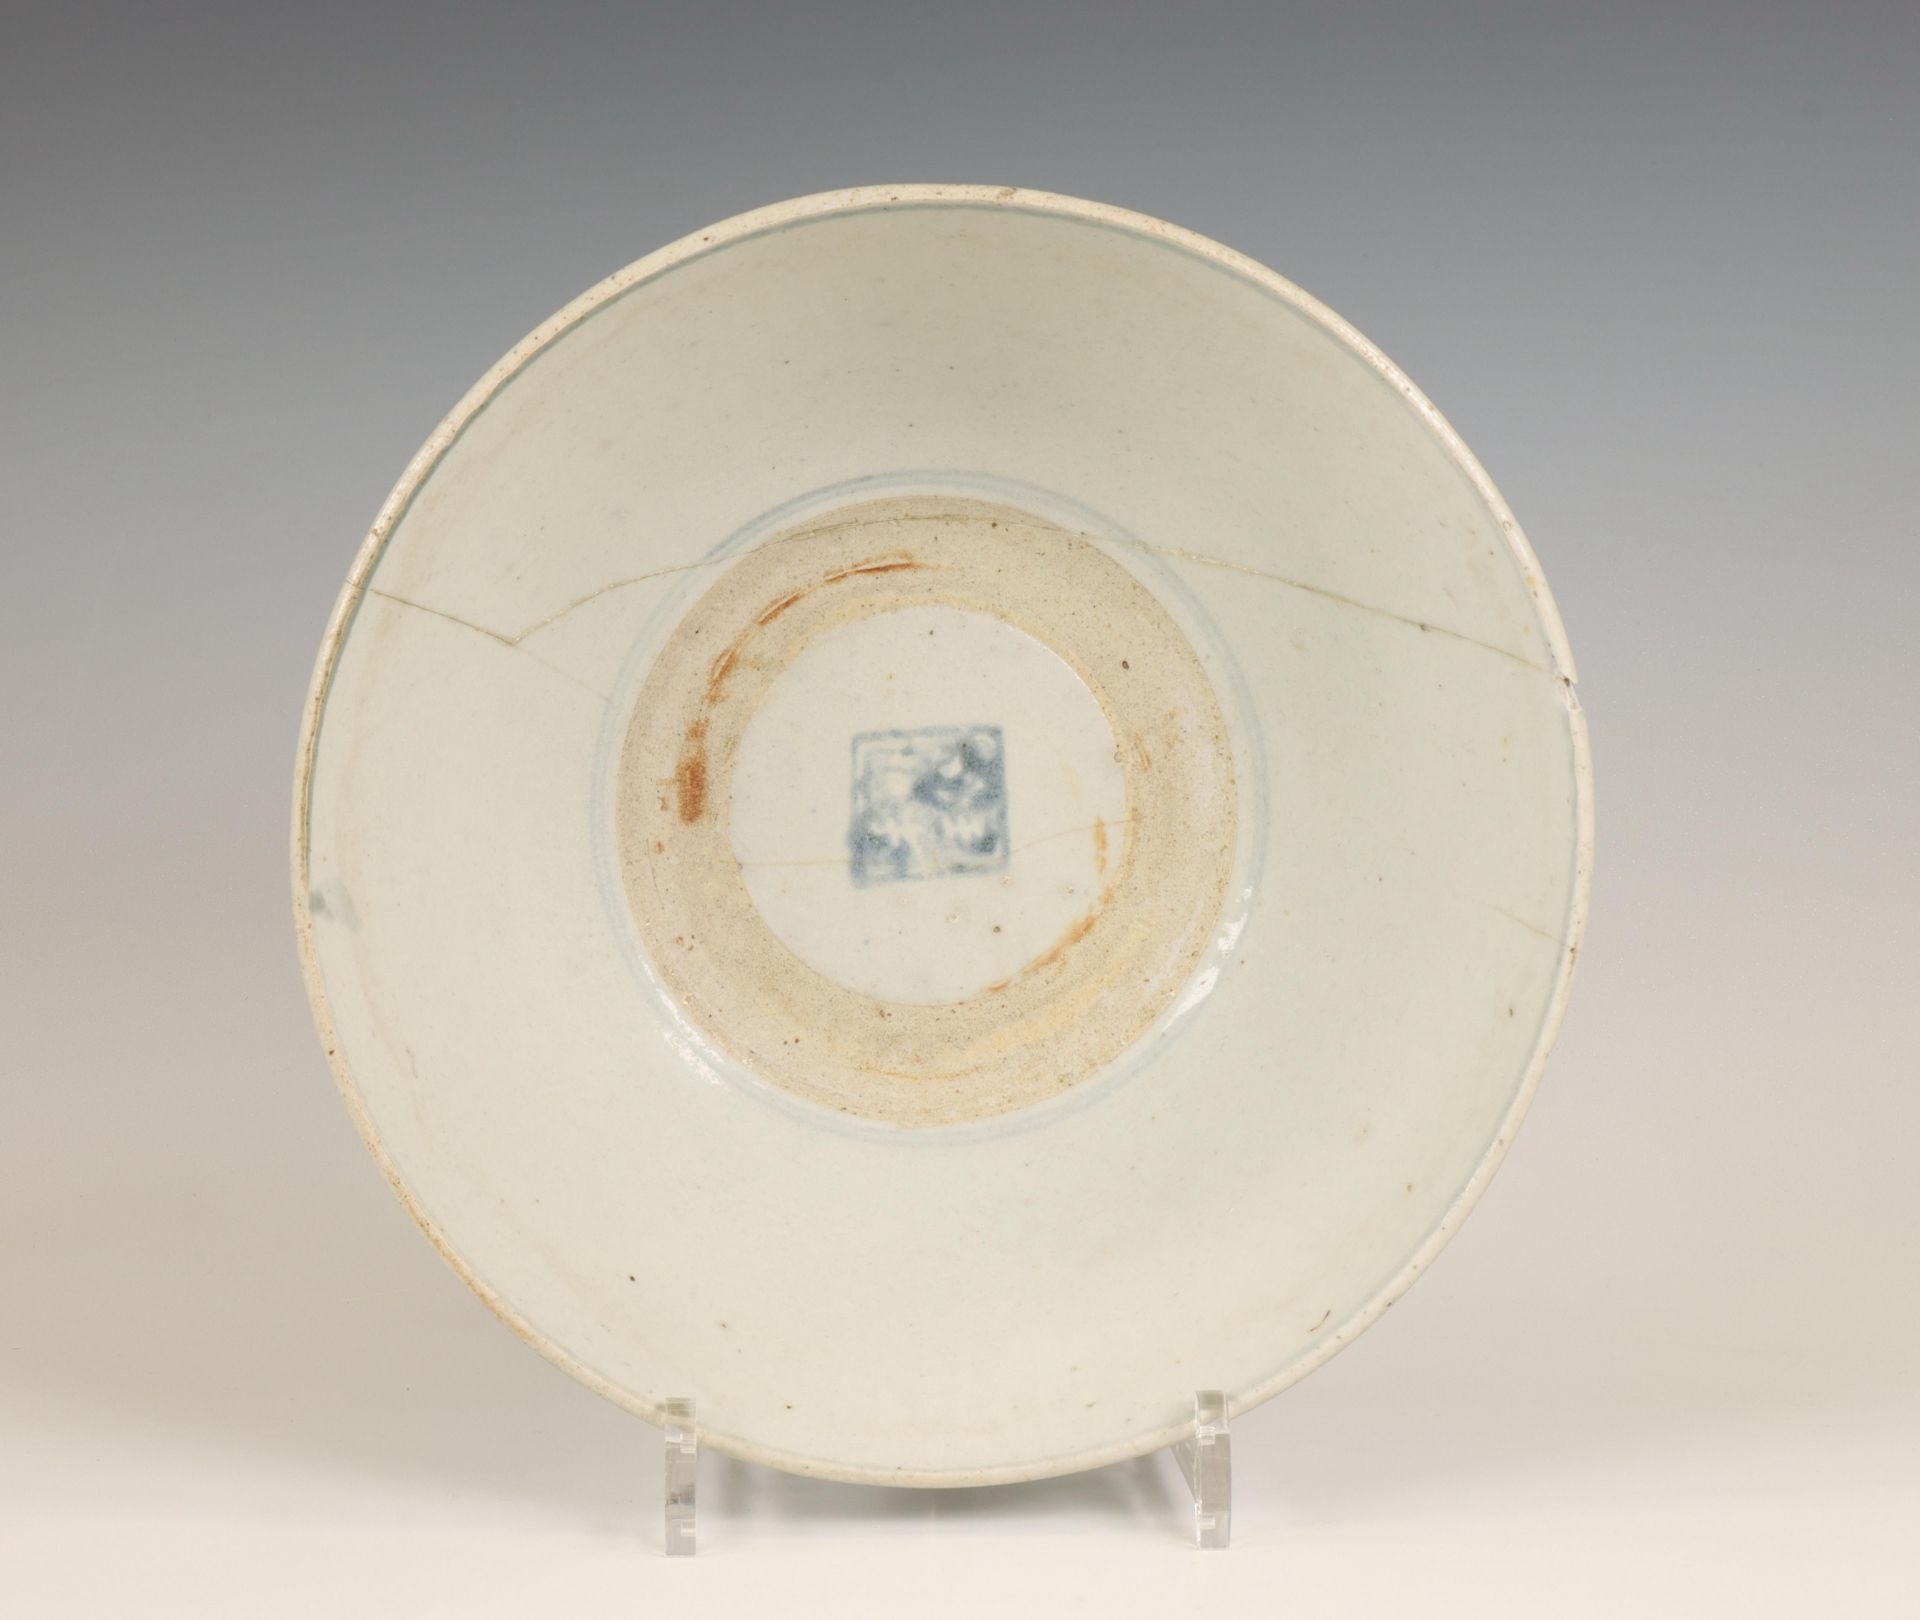 China, blue and white 'Shou character' bowl, ca. 1900, - Image 2 of 2